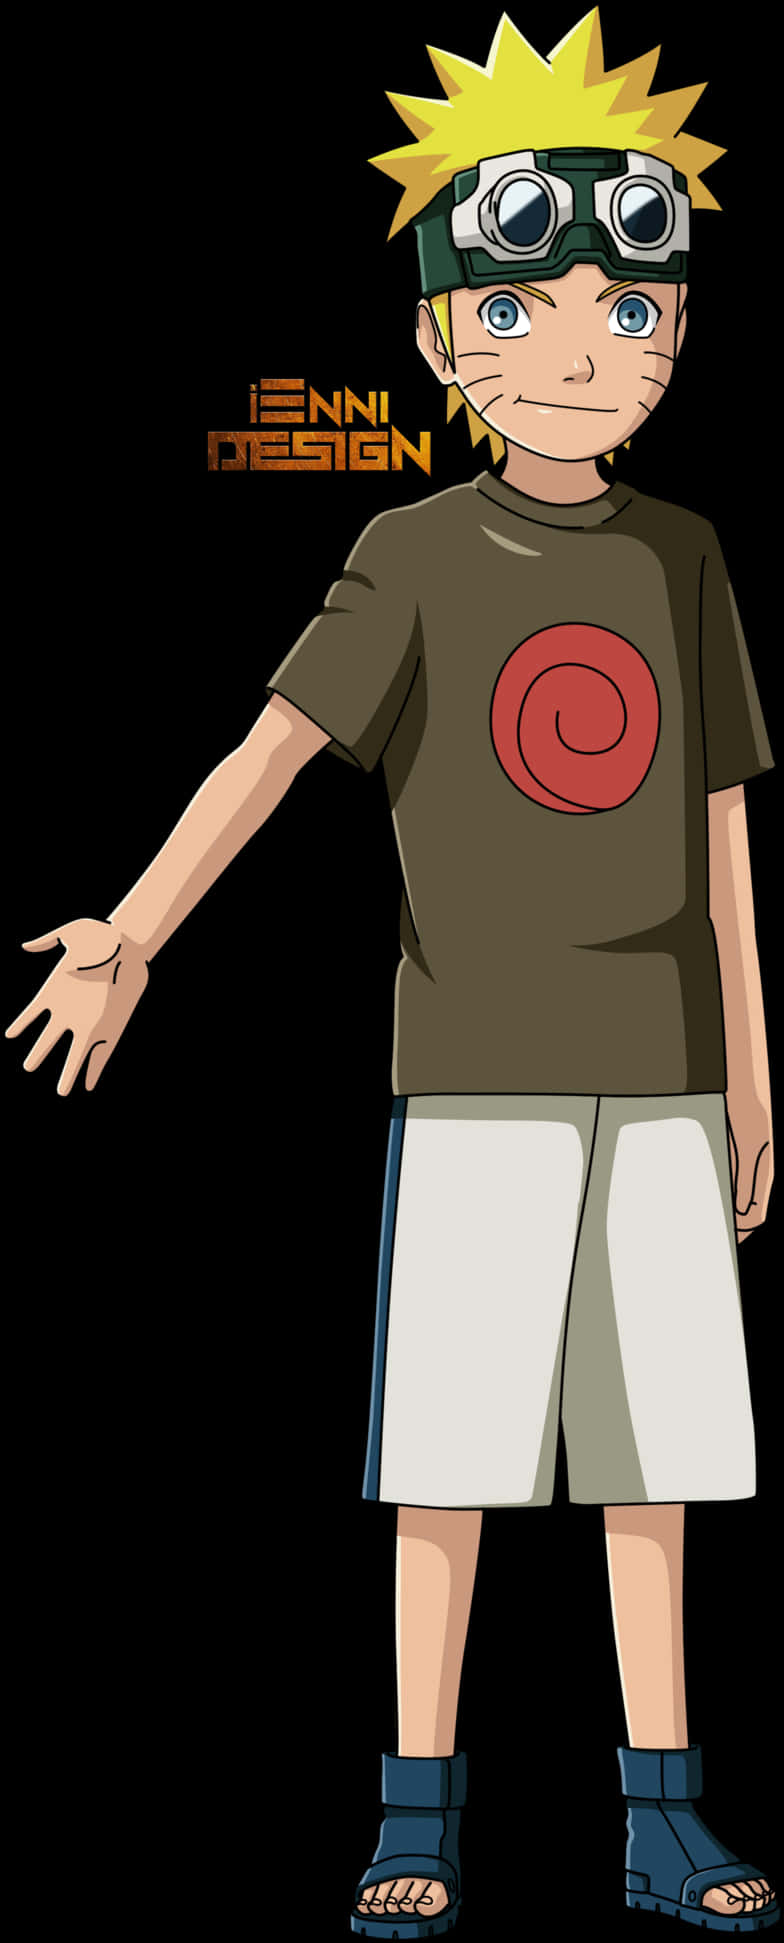 Cartoon Of A Man With His Arm Extended PNG